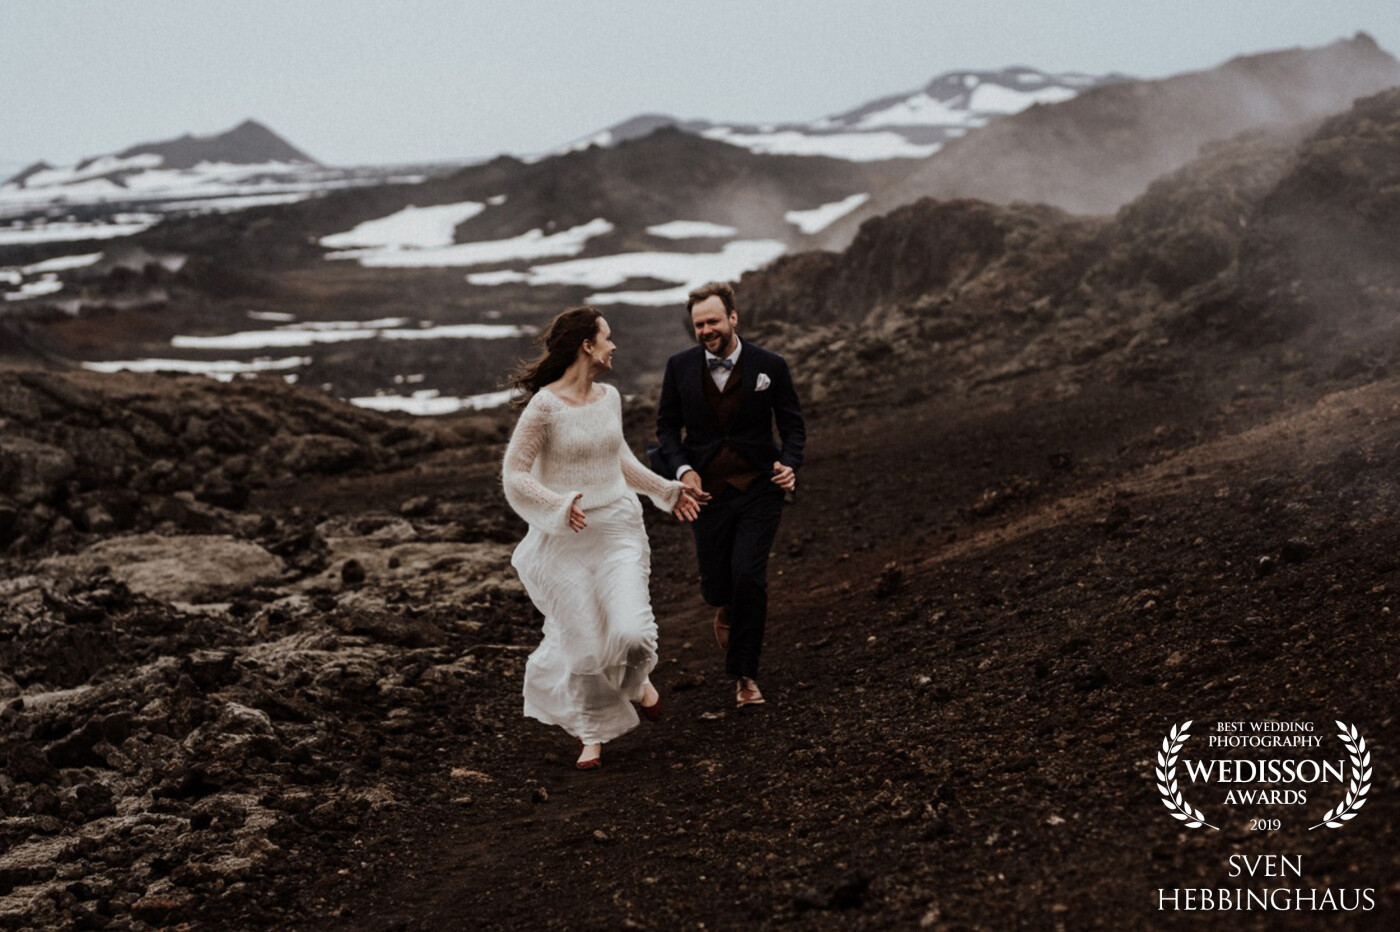 Running up that hill. That was our slogan while climbing the Iceland mountains with a wedding couple. These two lovers had so much fun. Thanks to the judge for choosing this pic.